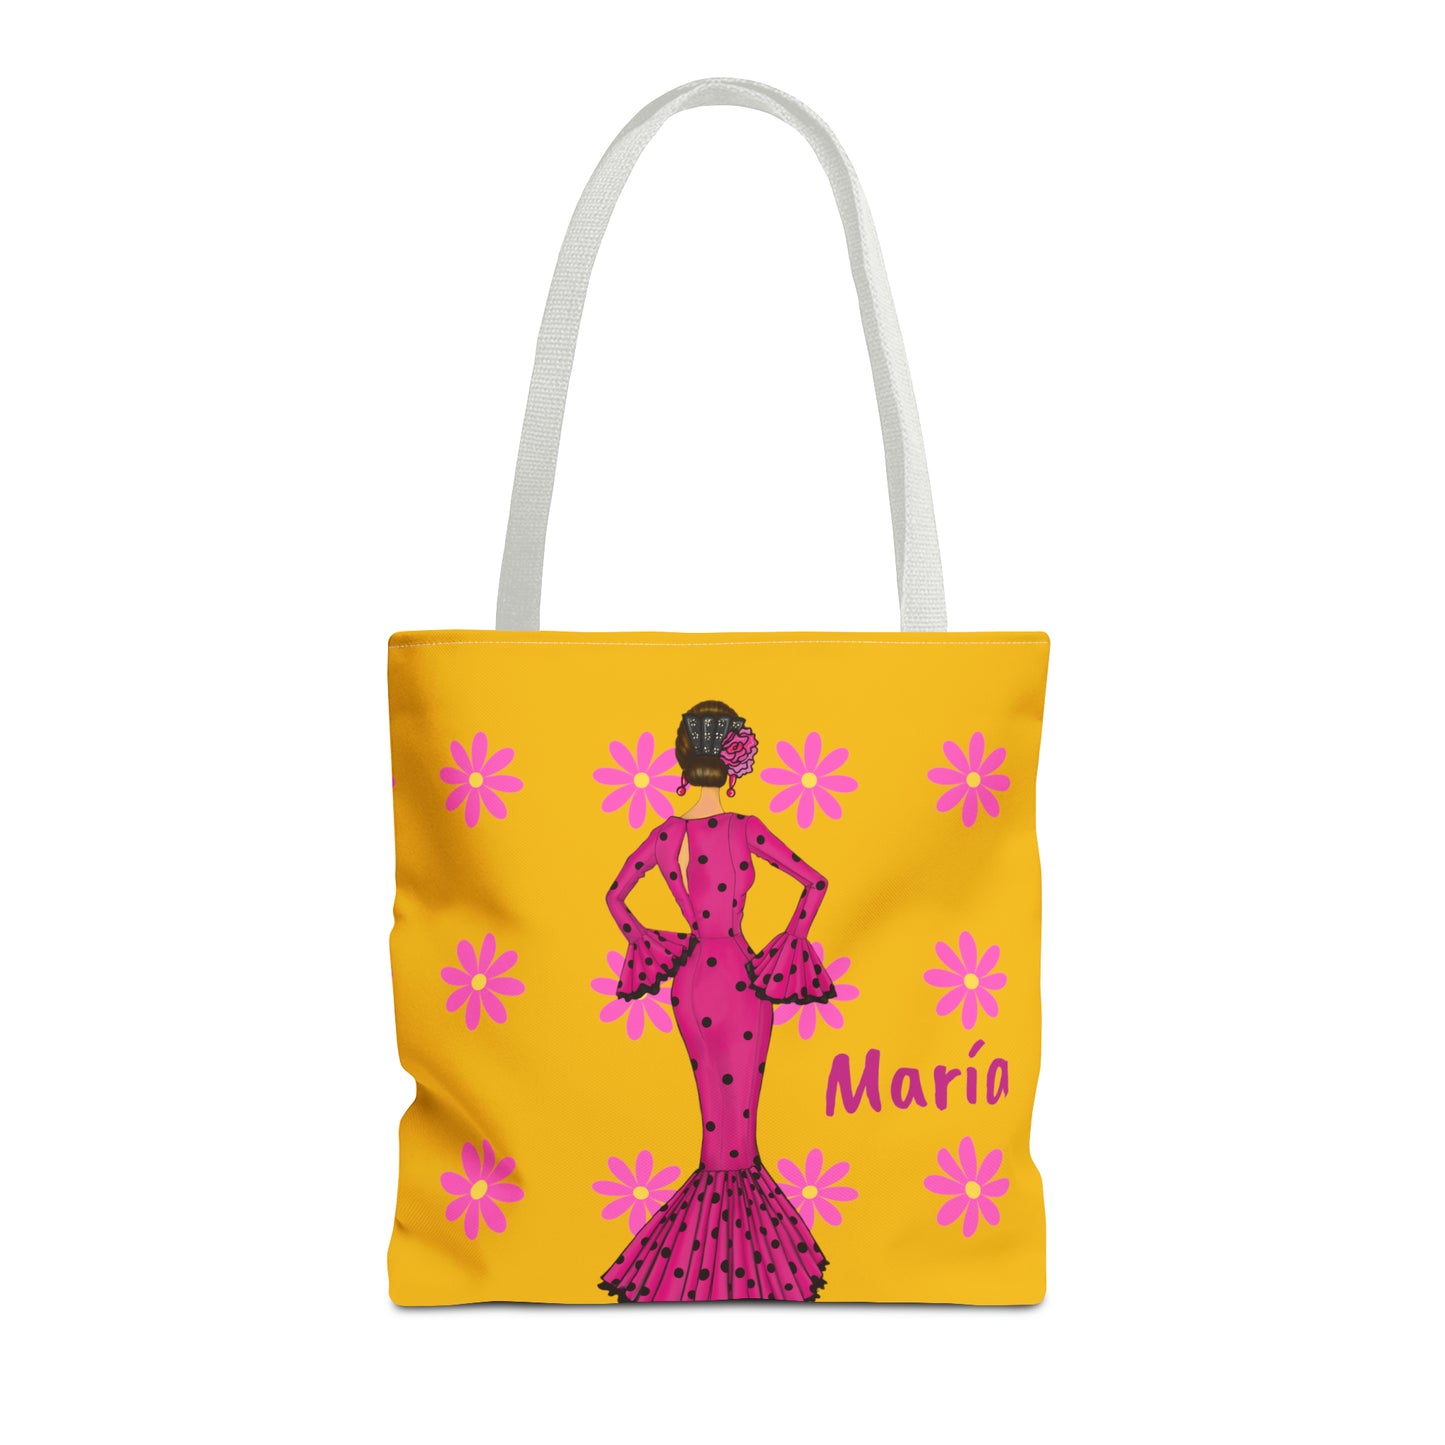 Flamenco lover Tote Bag, fabric tote bag with yellow background with pink flowers and our flamenco dancer Maria in a pink dress. Customizable.